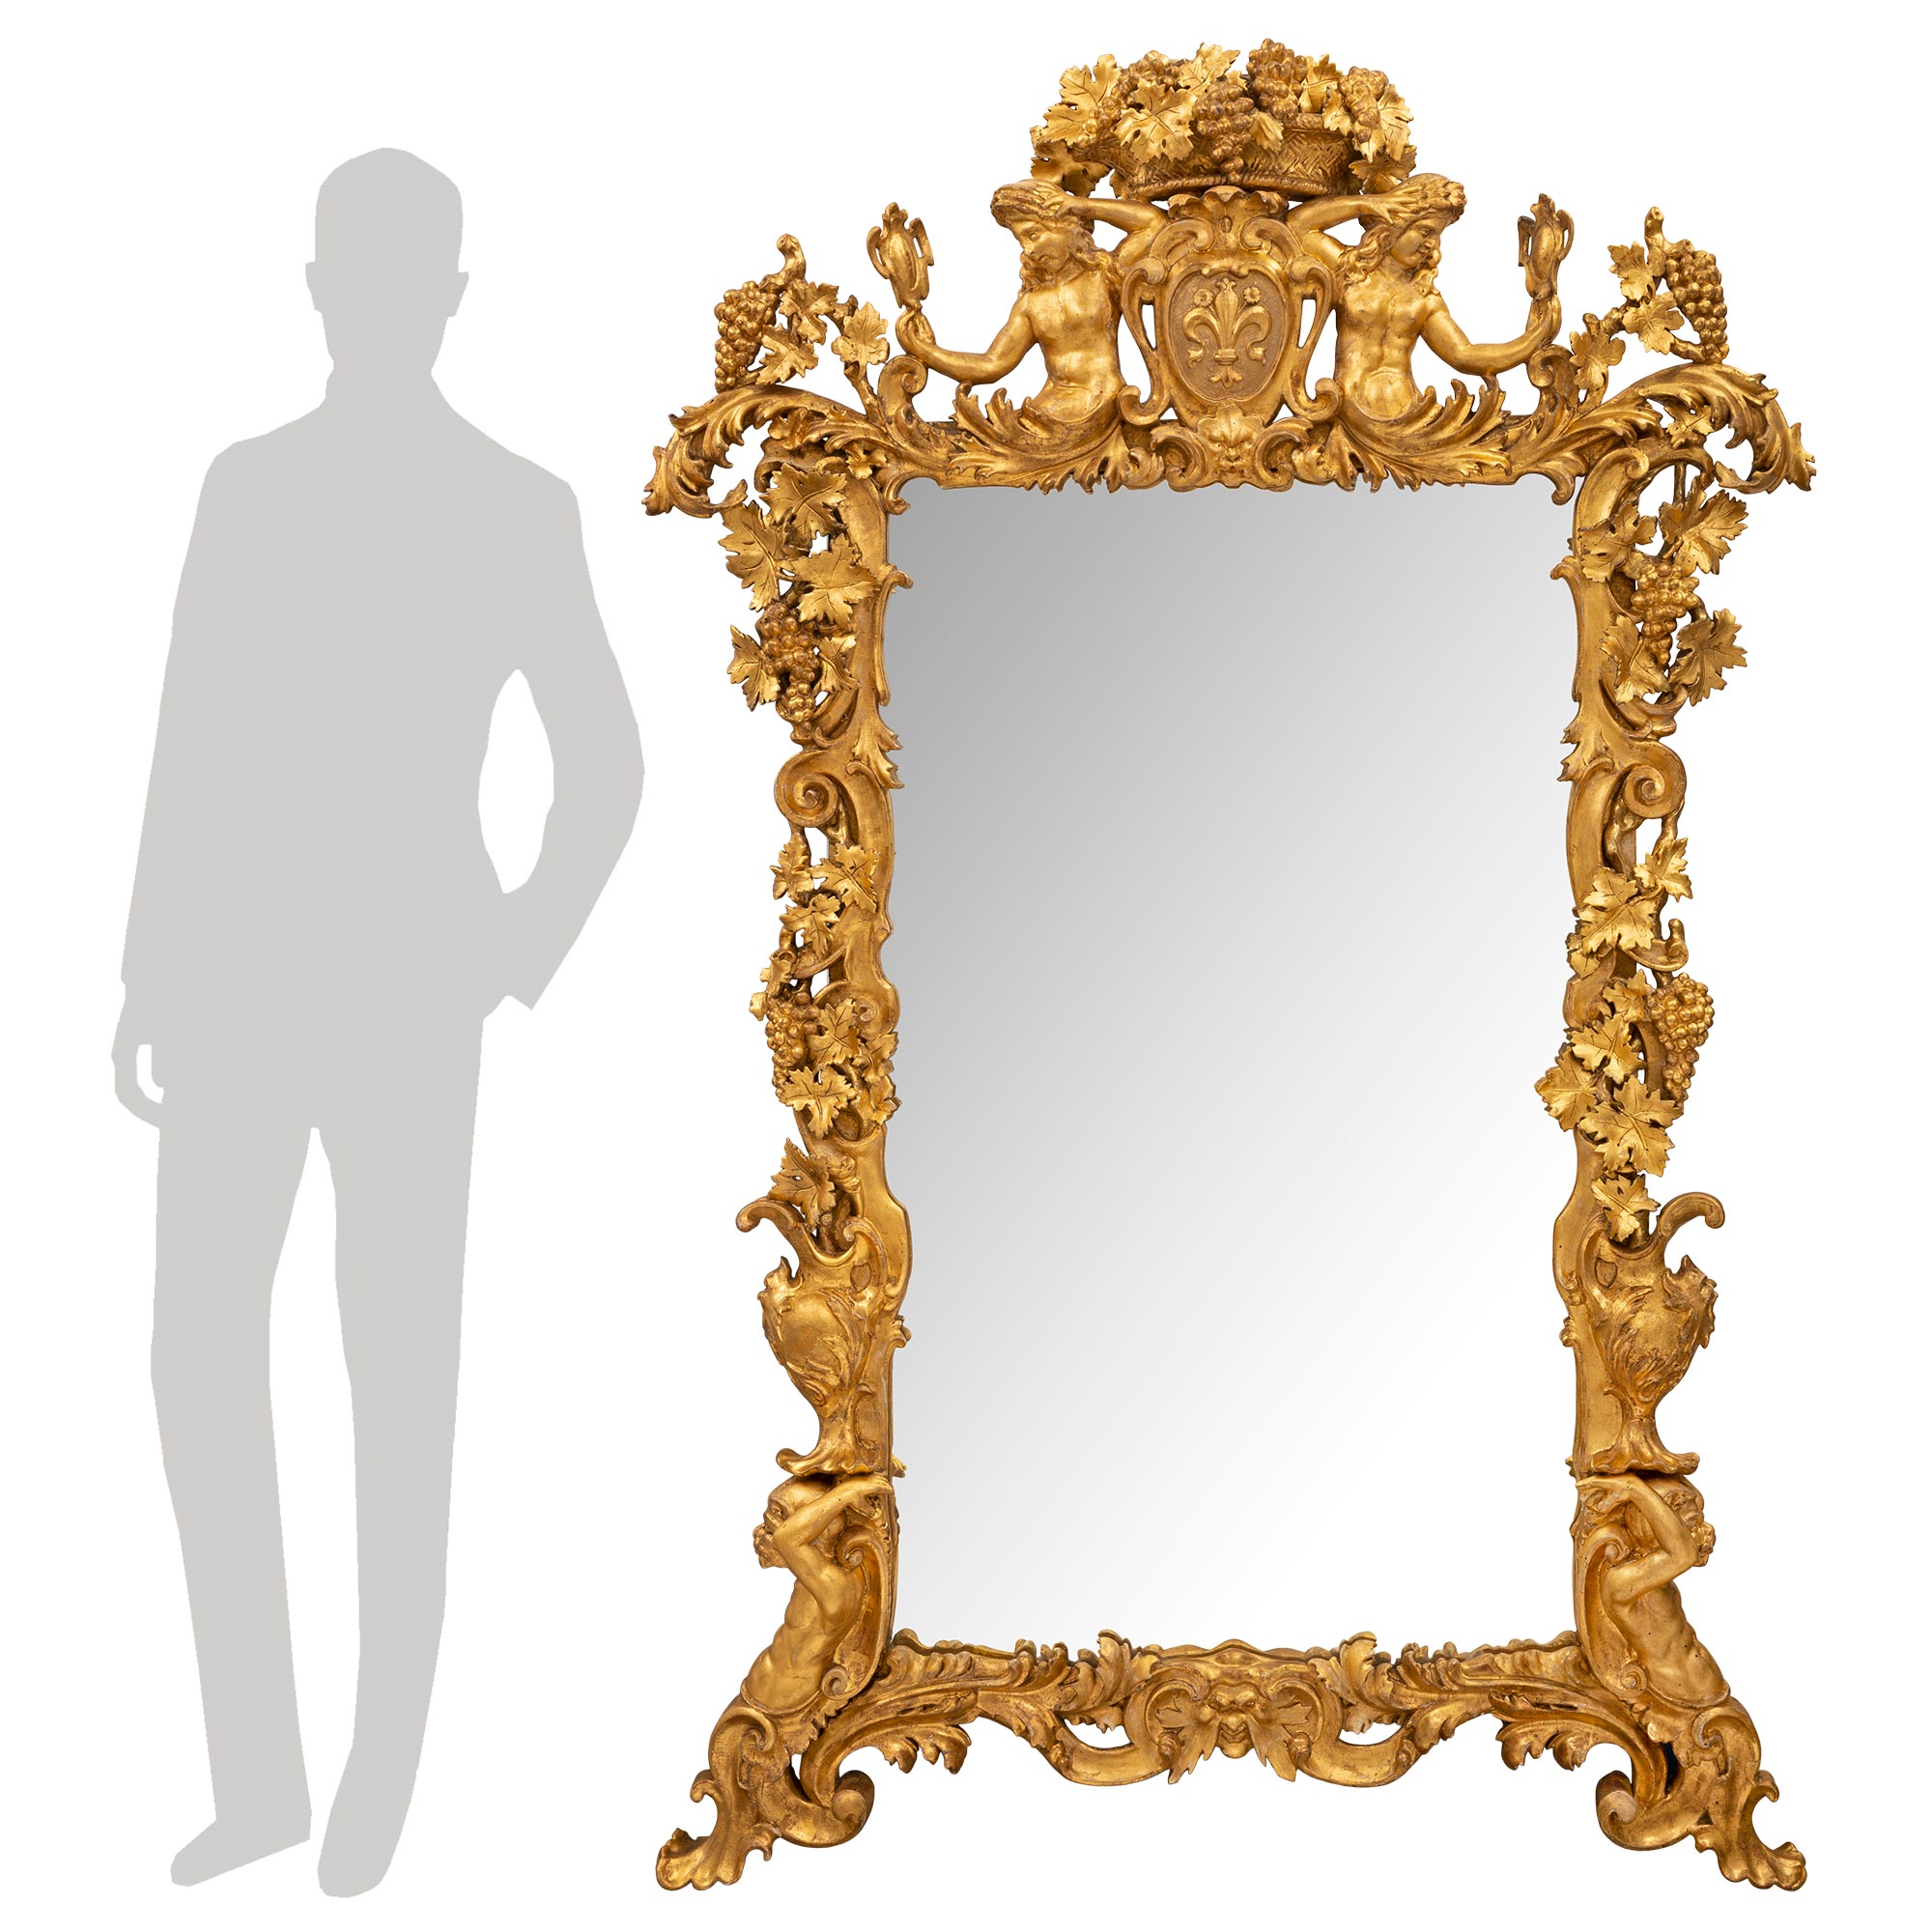 A spectacular and extremely high quality Italian 18th century Rococo period giltwood mirror. The mirror retains its original mirror plate set within the stunning intricately detailed giltwood frame. The frame displays an impressive central mask at